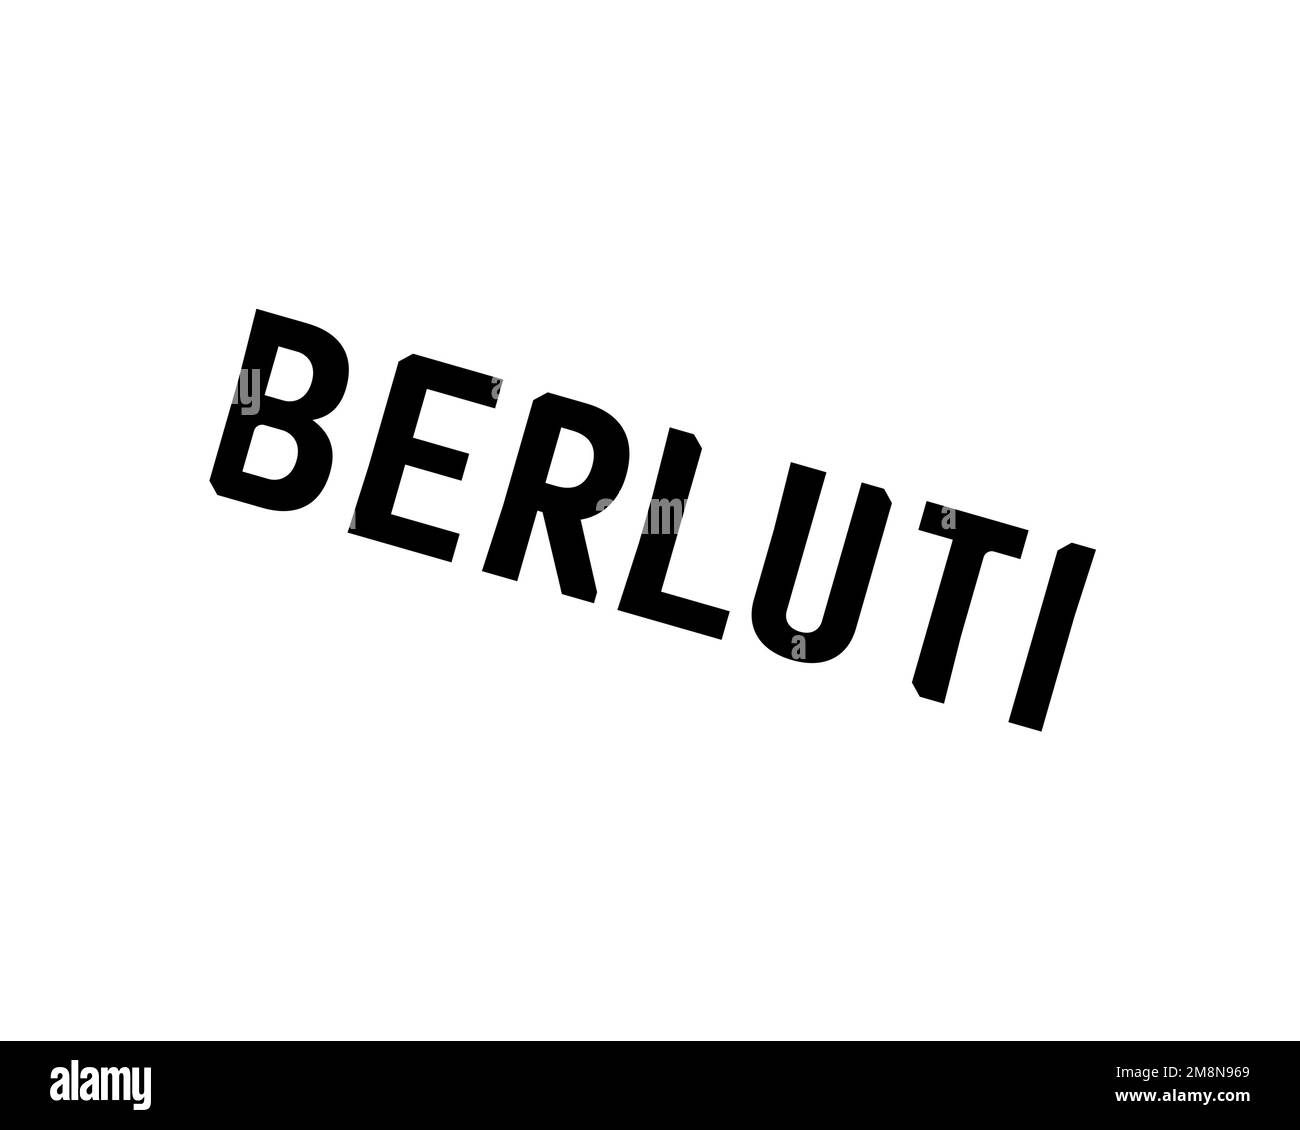 Berluti Cut Out Stock Images & Pictures - Alamy